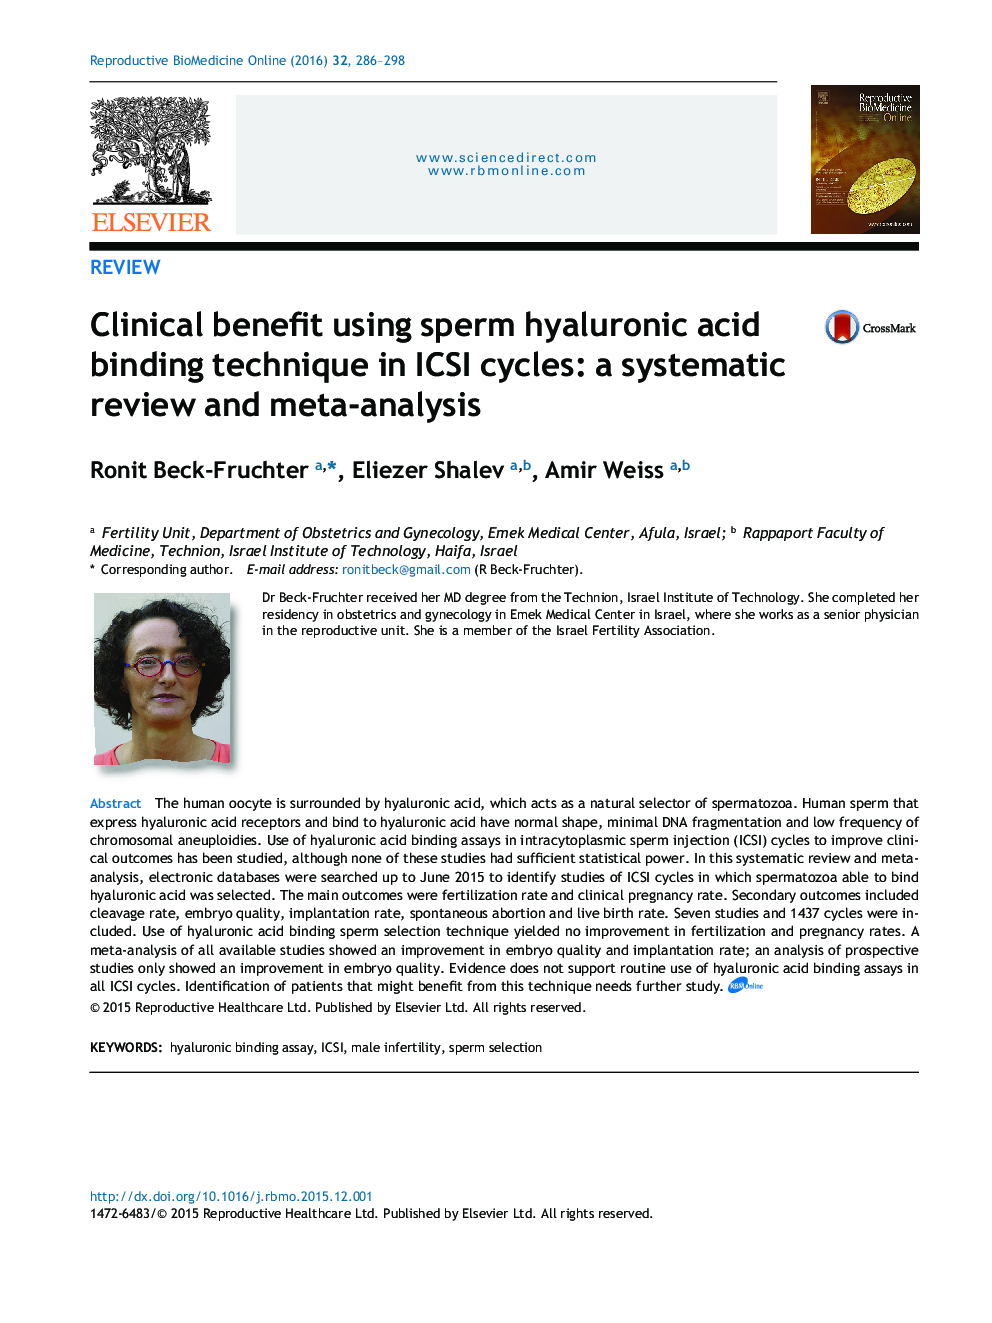 Clinical benefit using sperm hyaluronic acid binding technique in ICSI cycles: a systematic review and meta-analysis